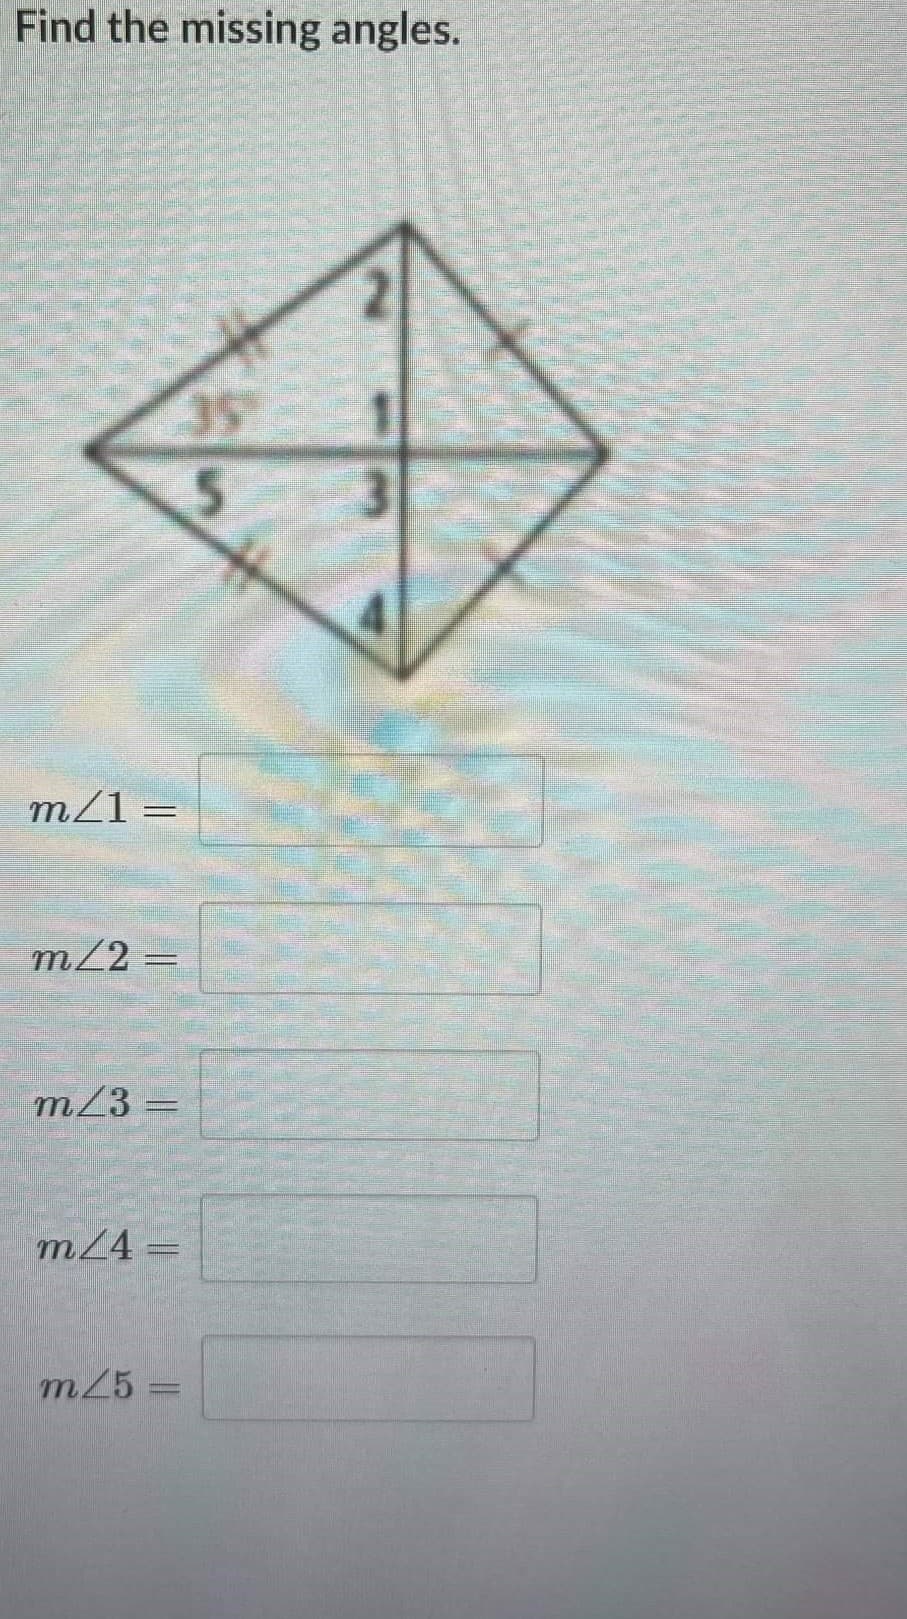 Find the missing angles.
mZ1 =
m/2
m23 =
m24 =
m25 =
